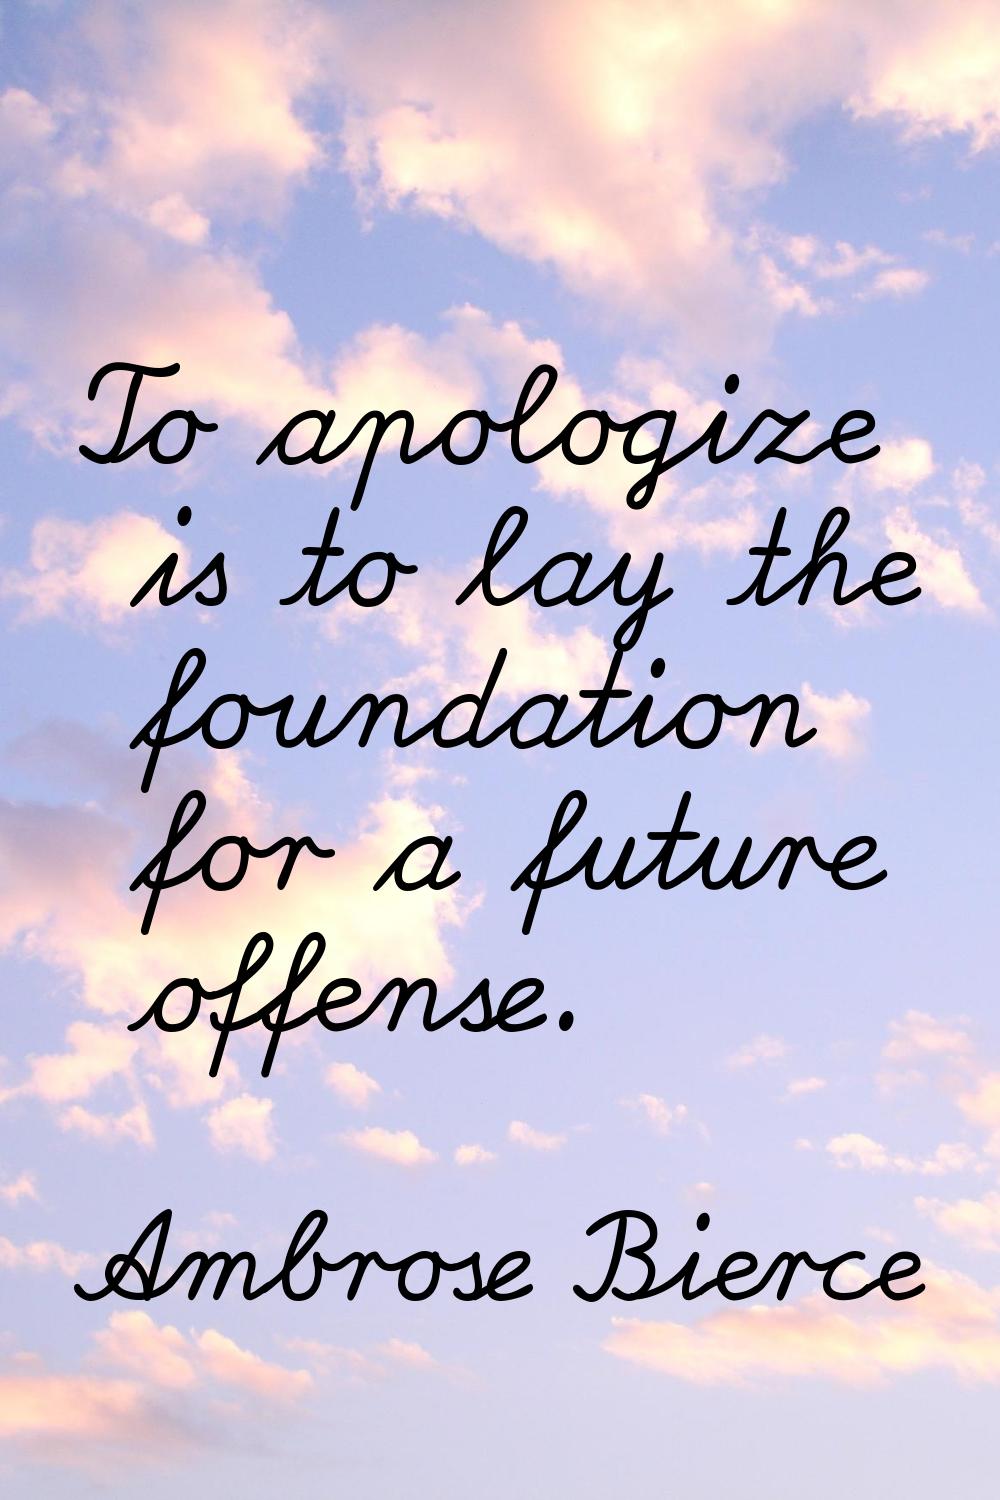 To apologize is to lay the foundation for a future offense.